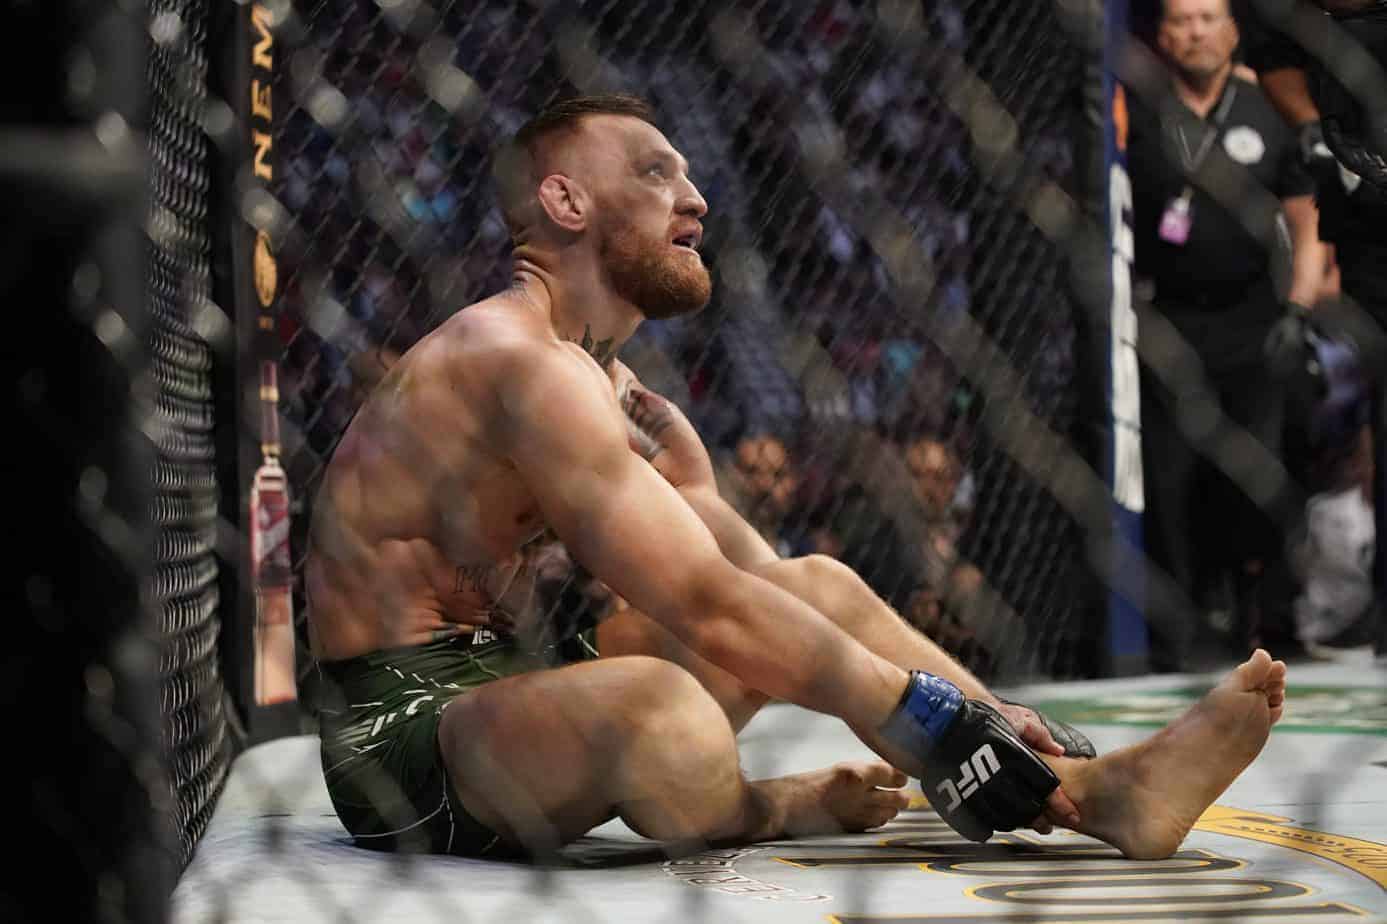 According to Conor McGregor's trainer, his ankle was already injured prior to him suffering the gruesome injury against Dustin Poirier